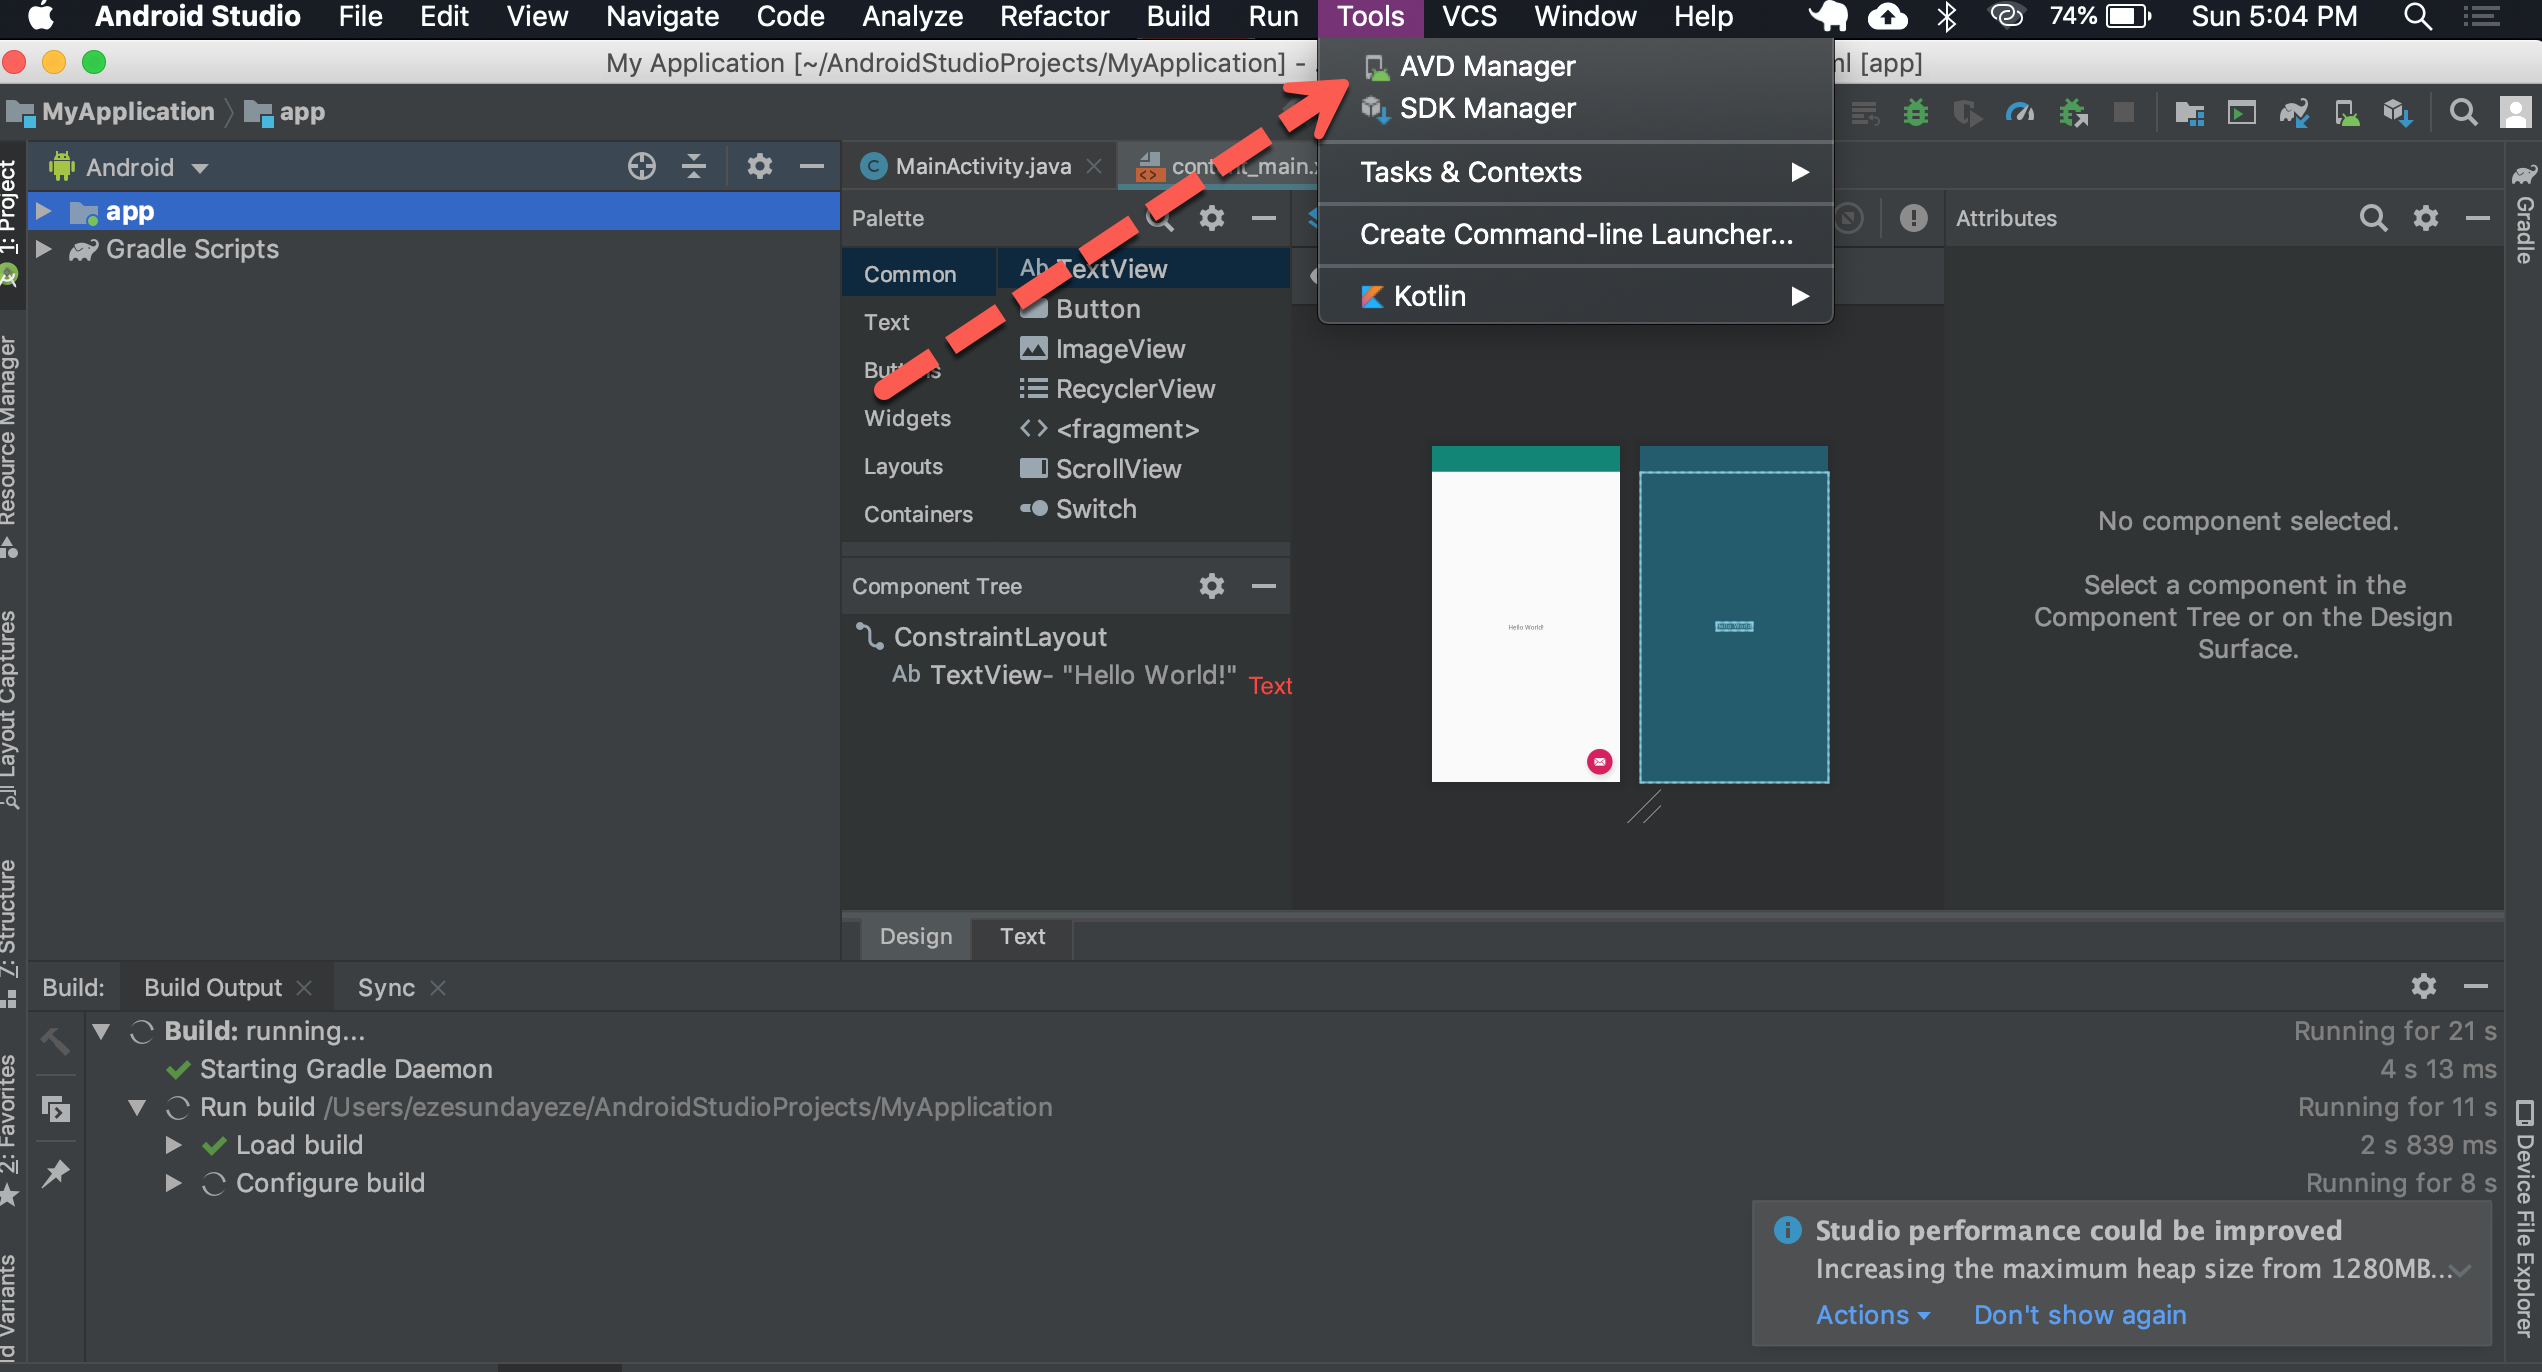 Screenshot of Android Studio with Tools Menu Open